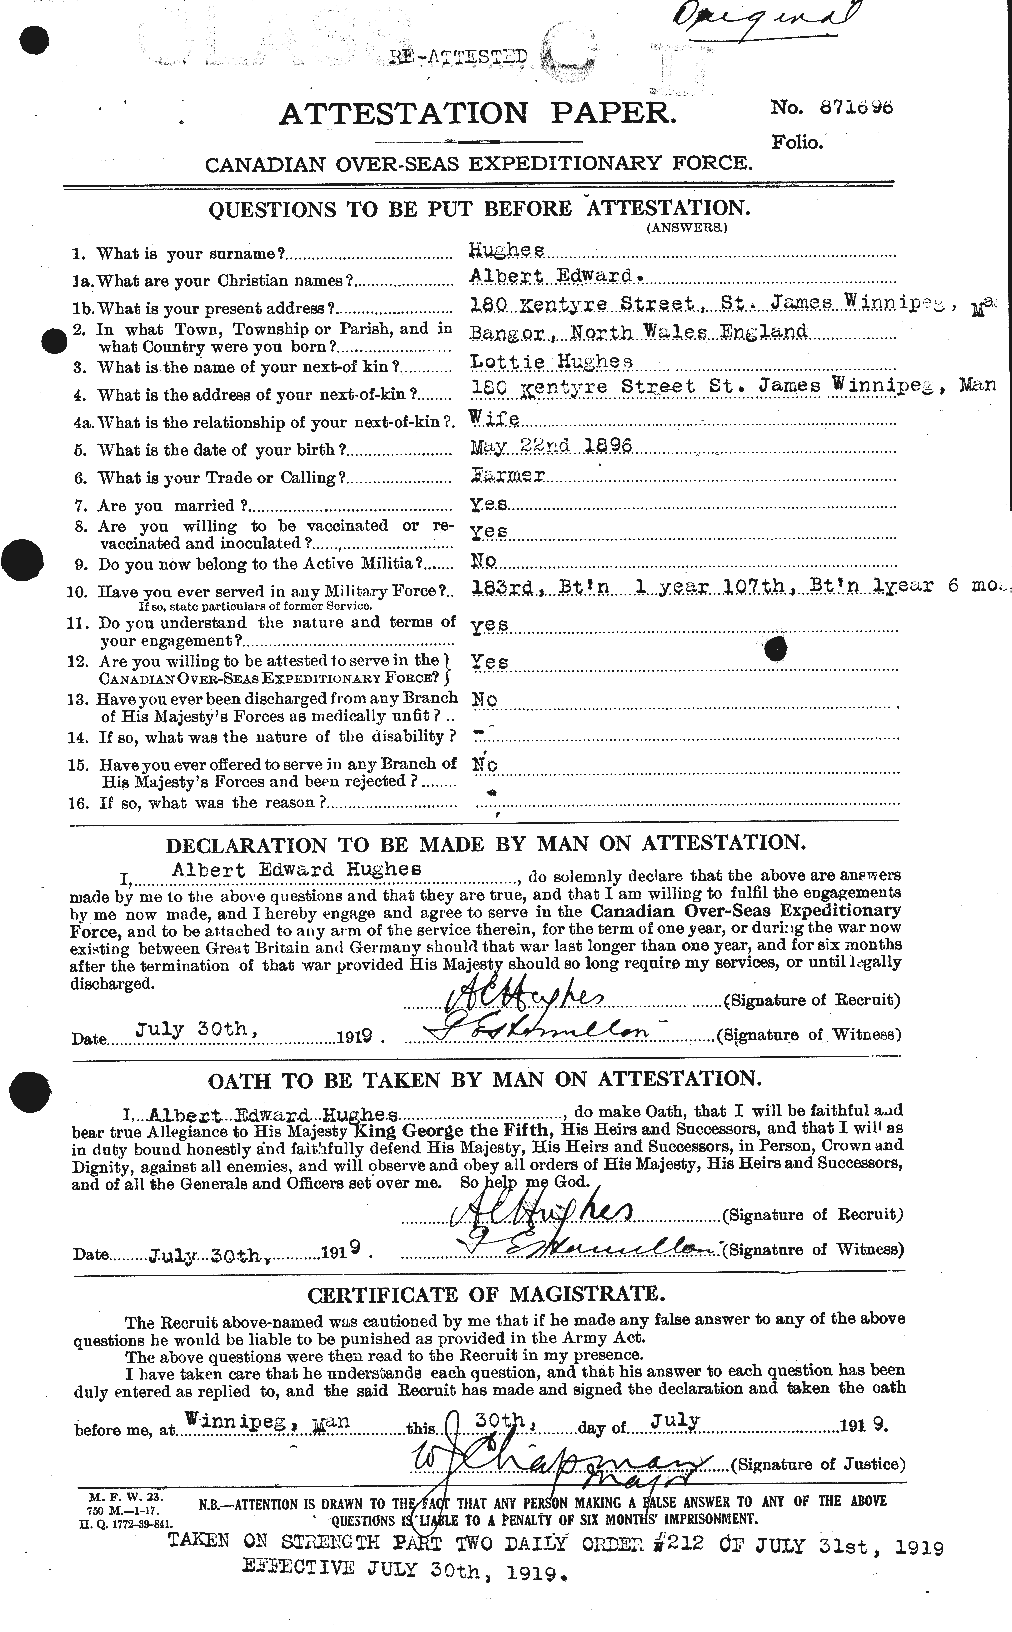 Personnel Records of the First World War - CEF 402519a